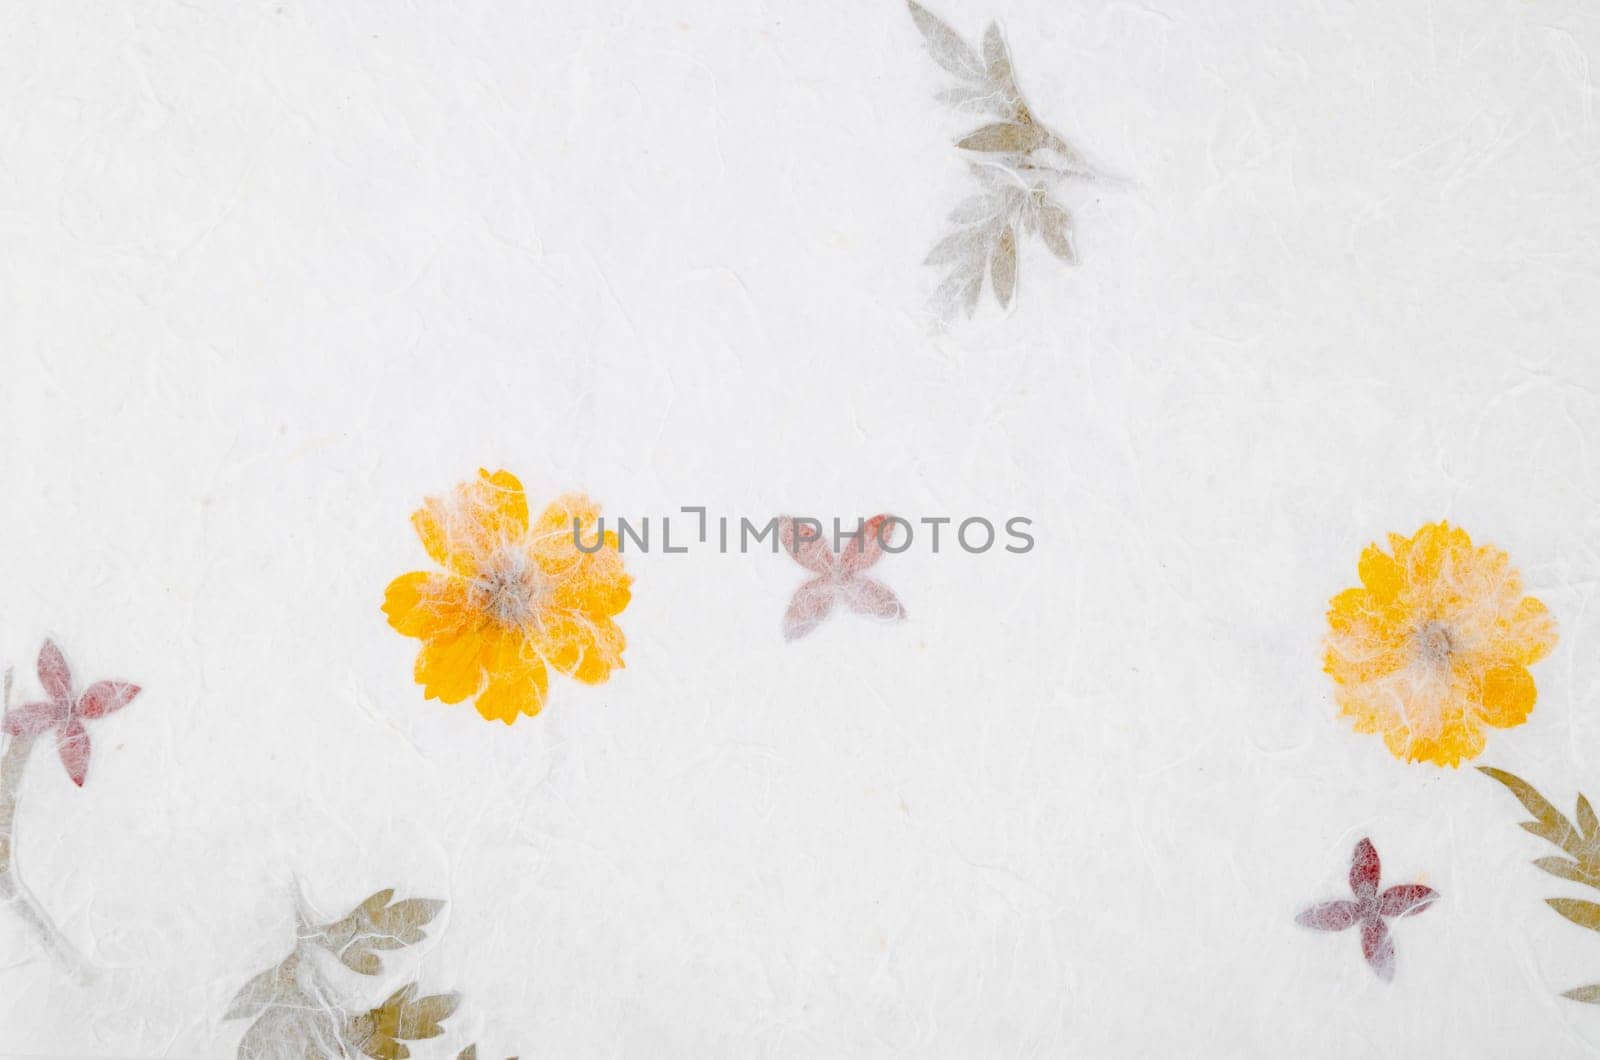 Handmade recycled flower and leaf paper or Mulberry paper texture as background.